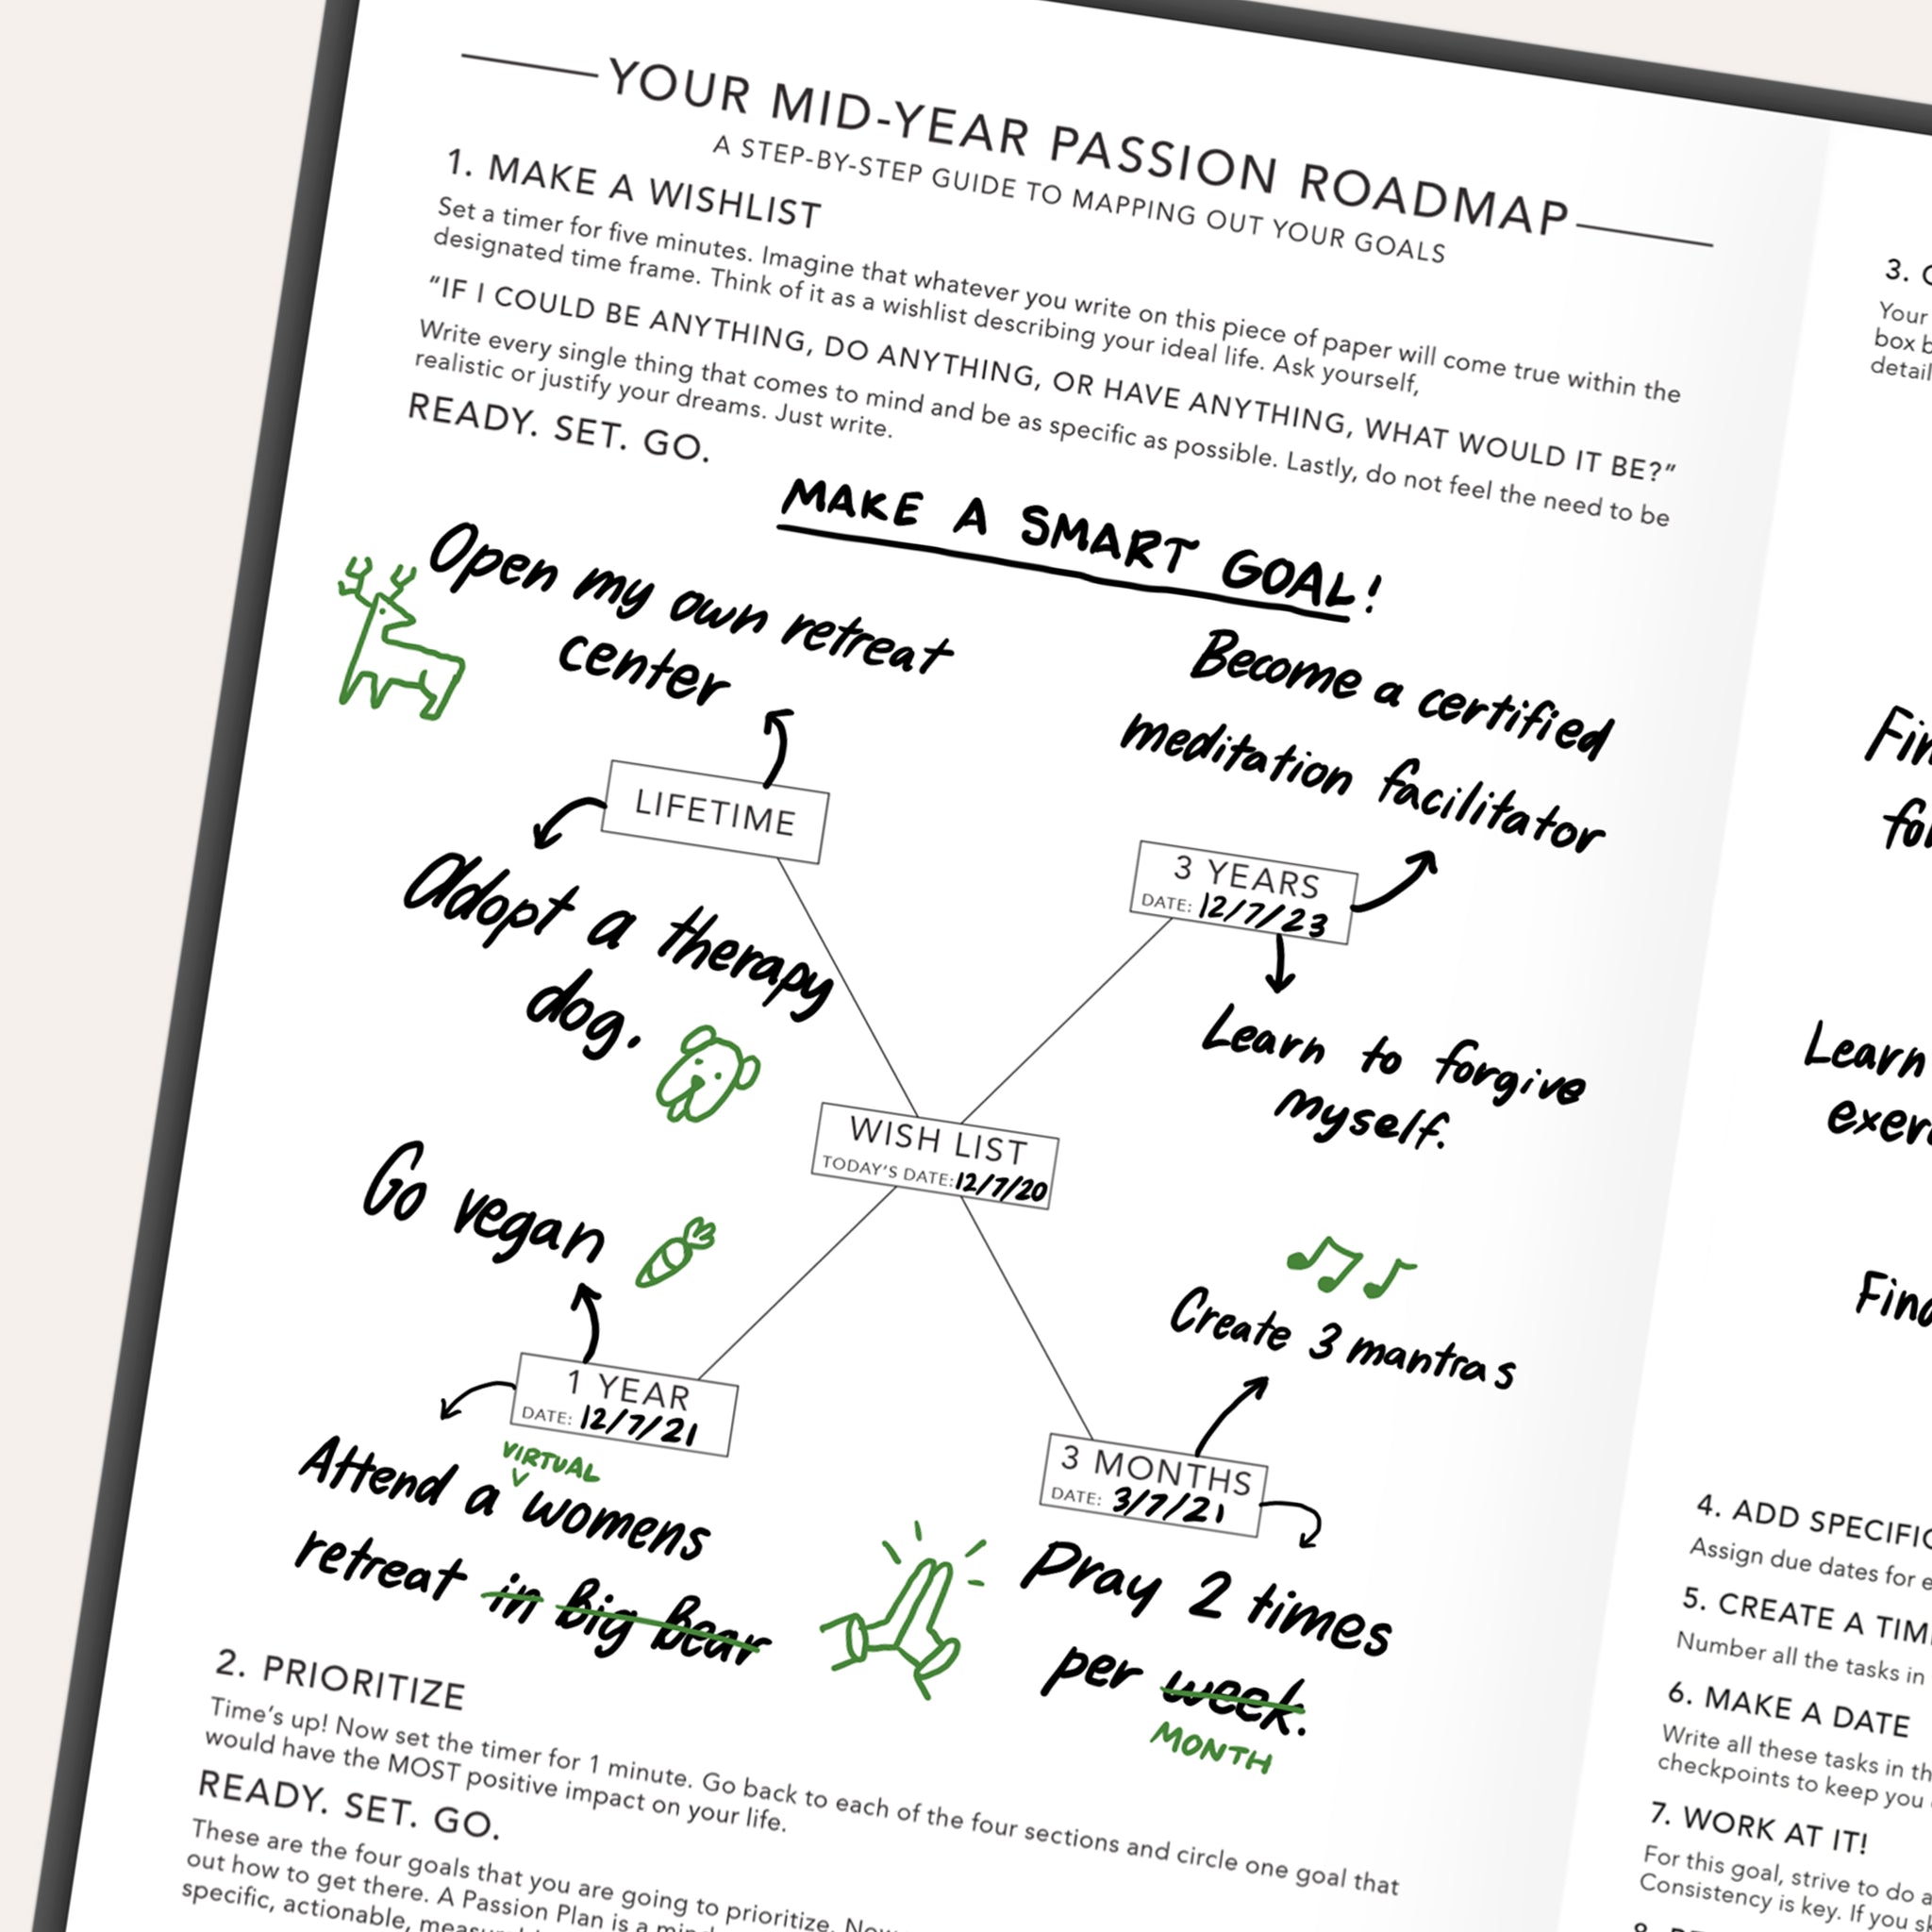 Passion Roadmap Exercise